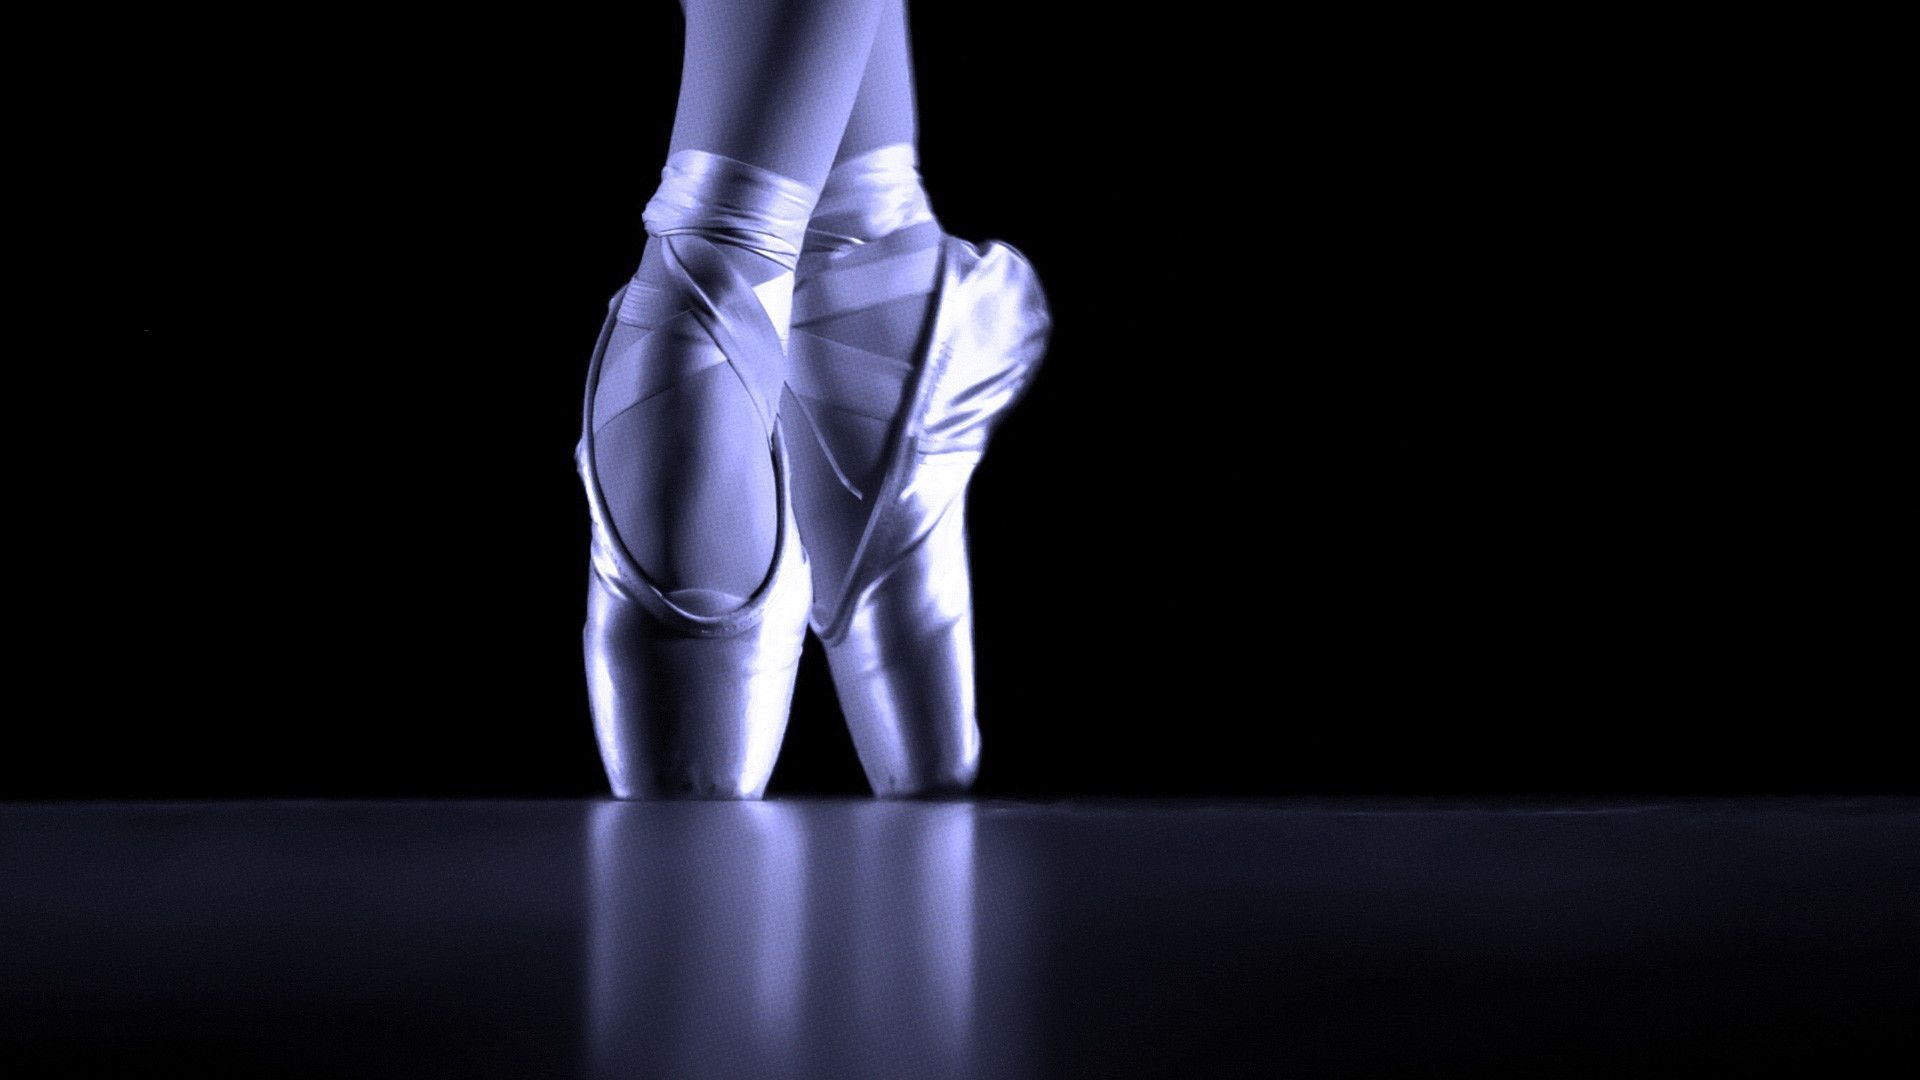 Ballet: A pointe shoe worn by dancers when performing pointe work. 1920x1080 Full HD Background.